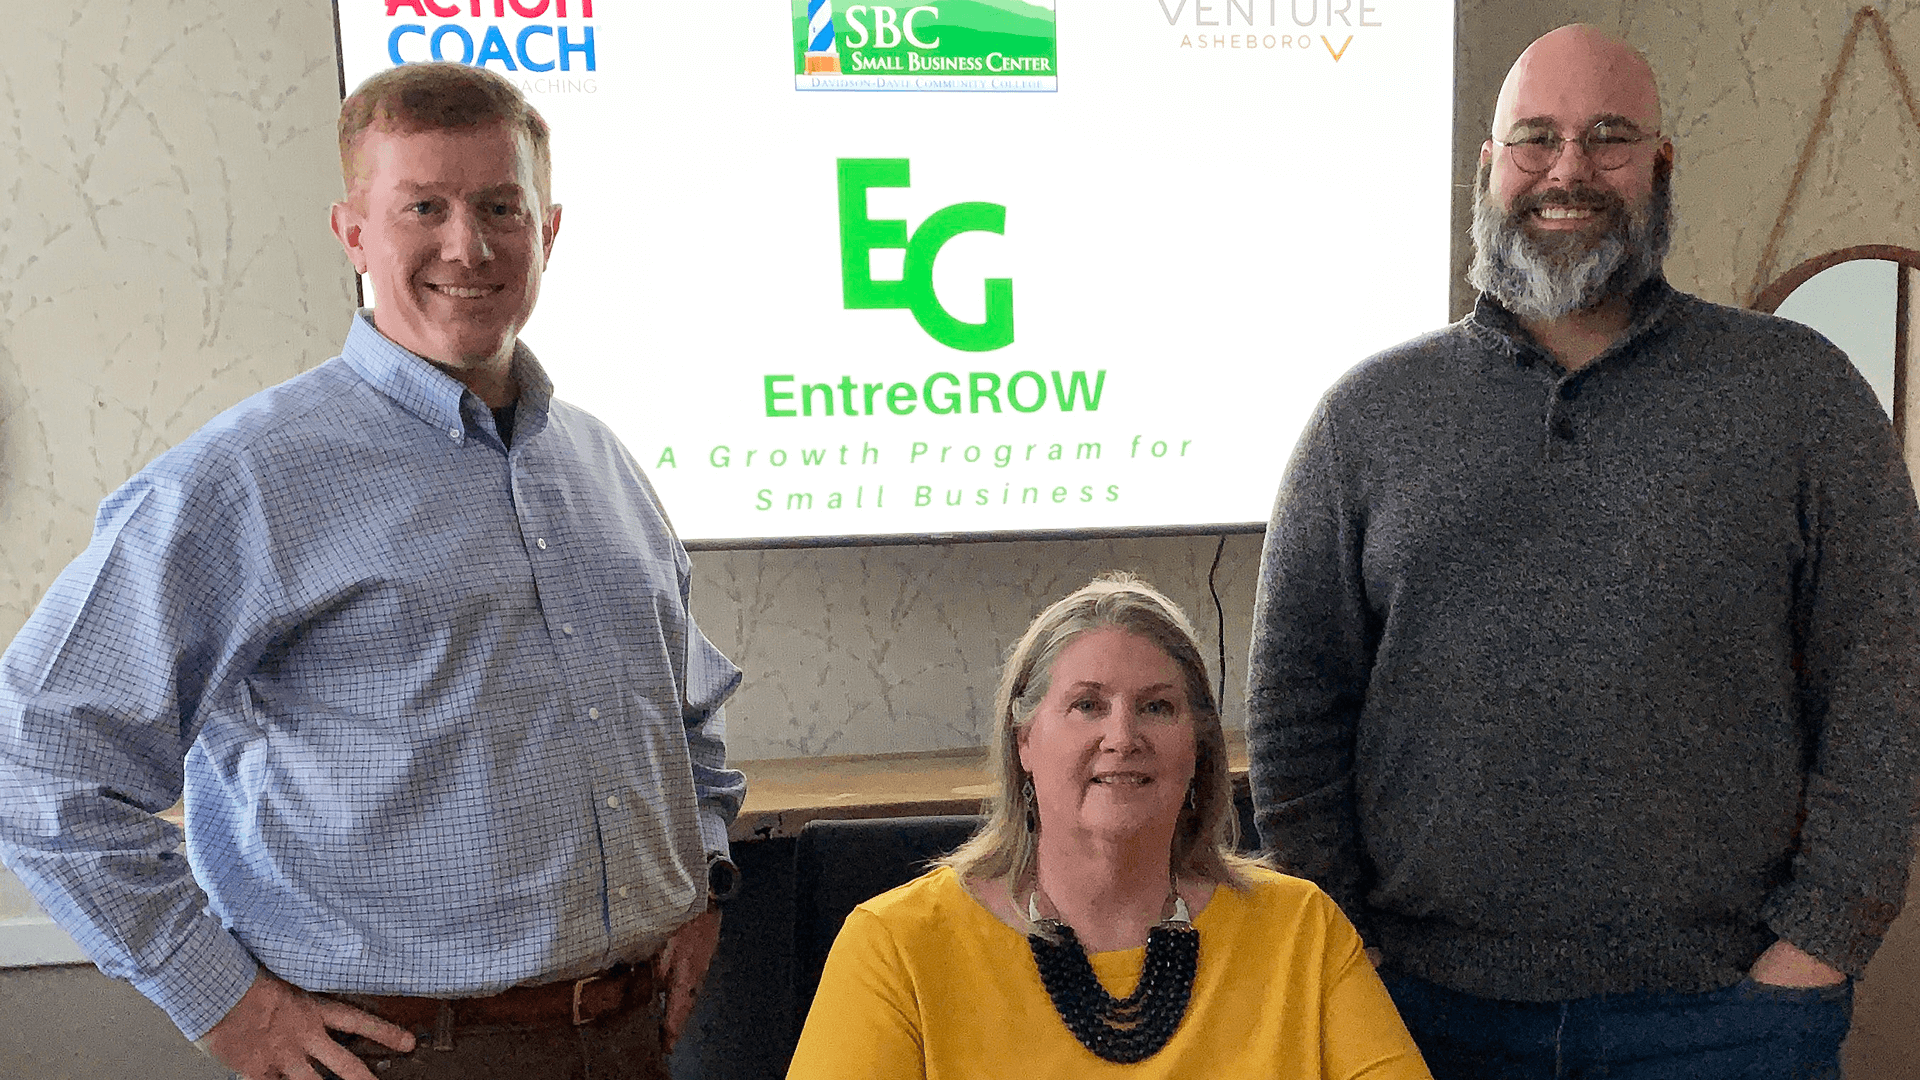 Davidson-Davie Small Business Center partners to bring EntreGROW to the Piedmont Region